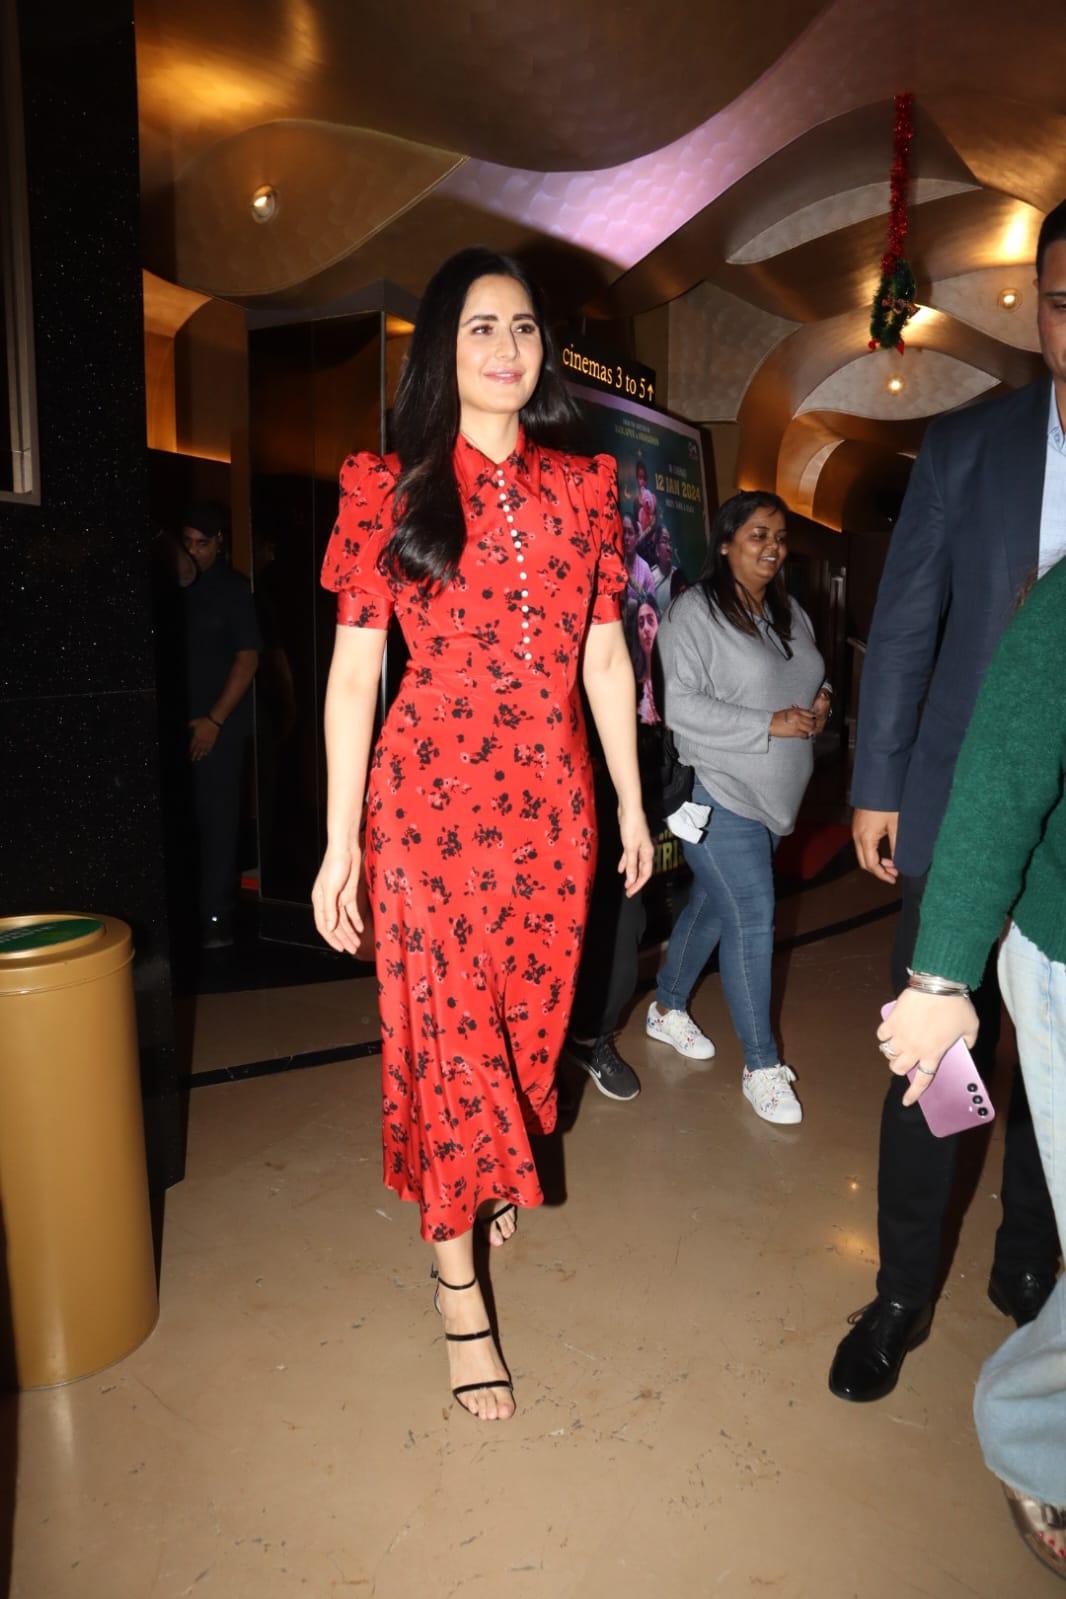 The press conference for the upcoming movie Merry Christmas was held in Mumbai on Thursday. Actress Katrina Kaif was spotted arriving for it